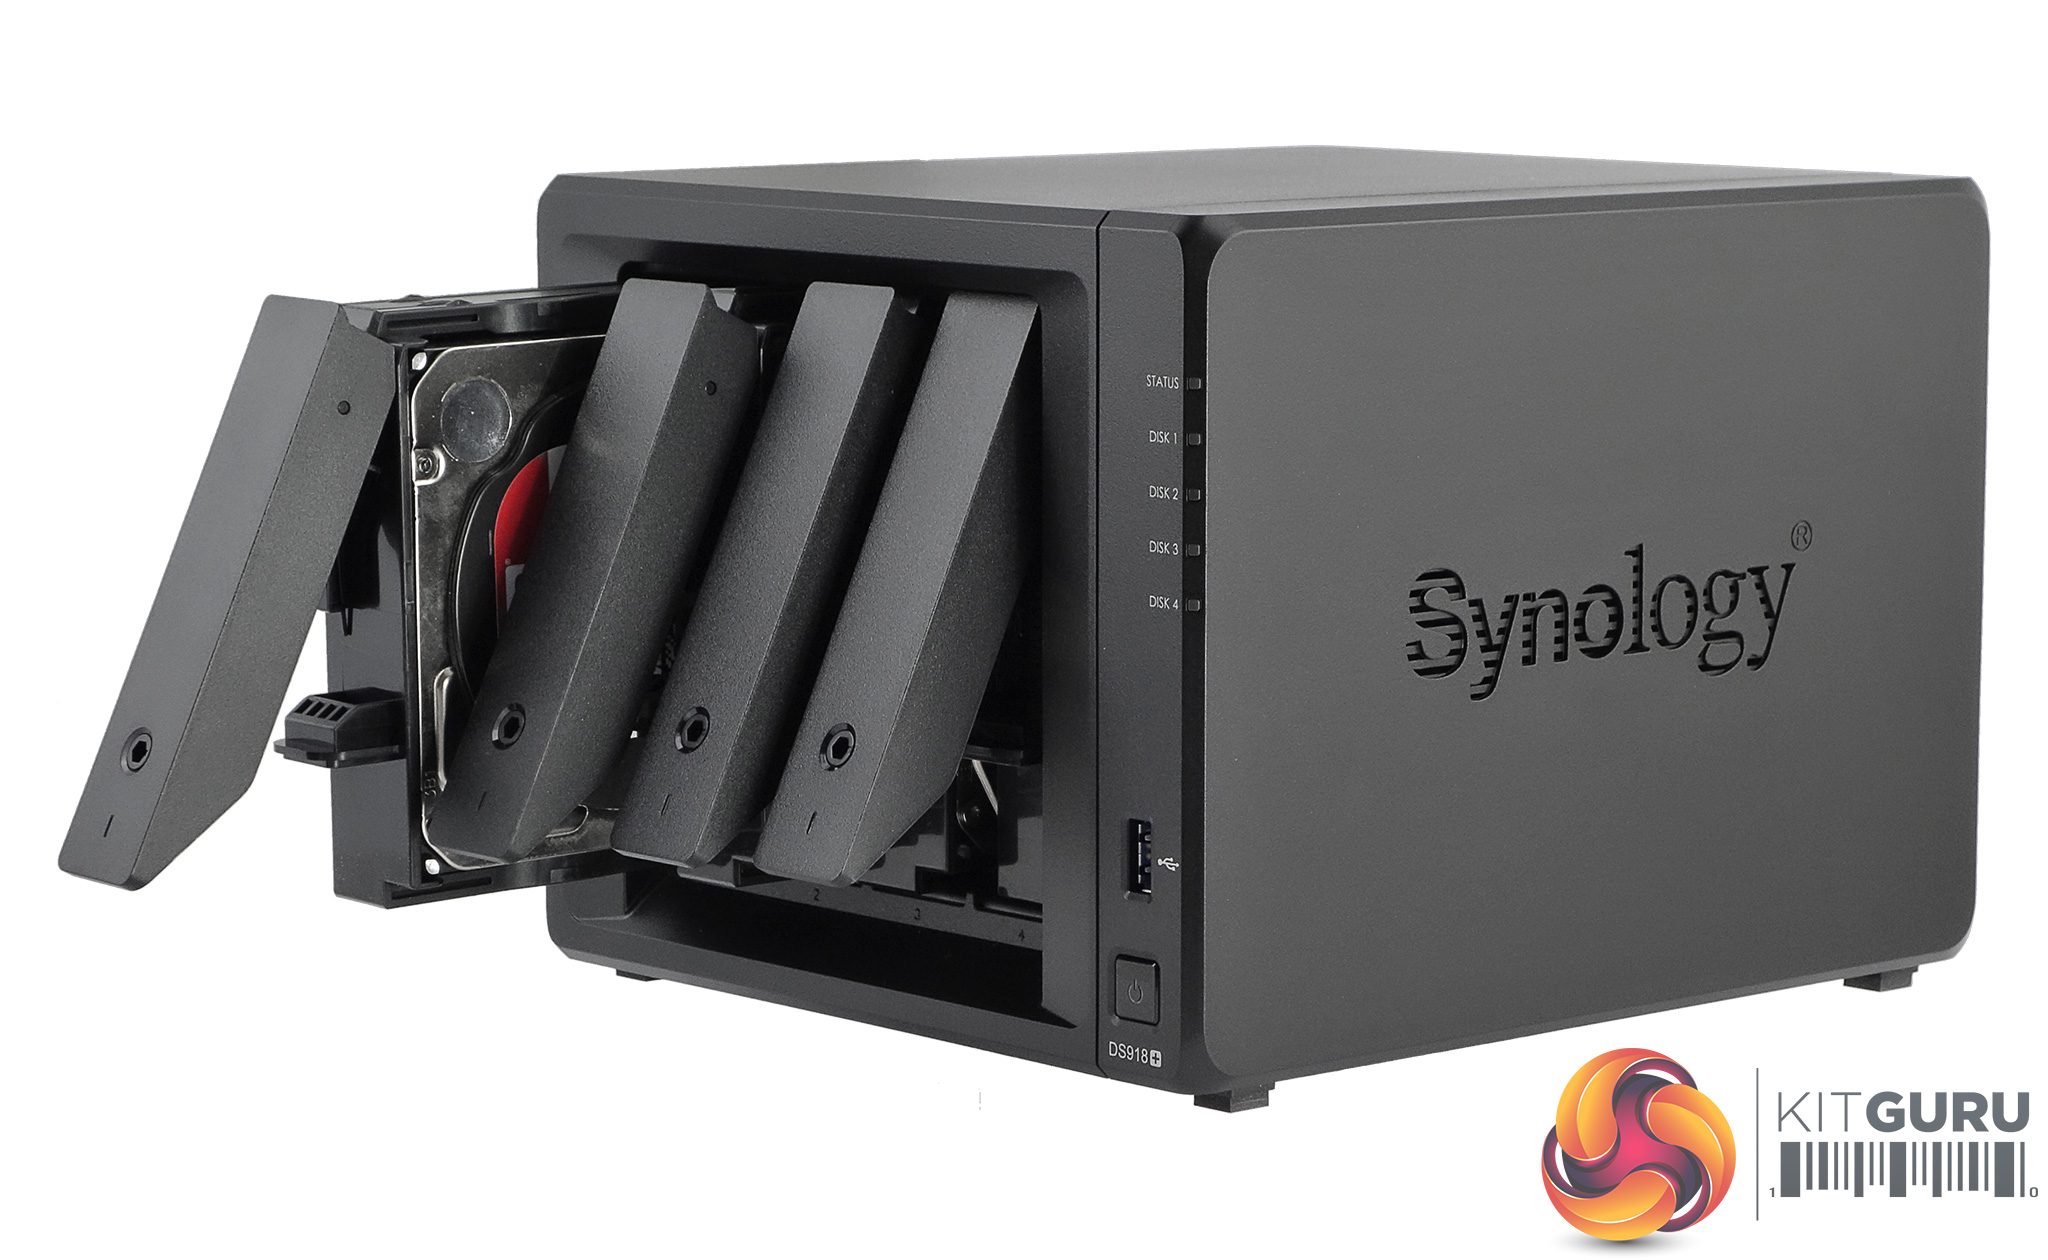 PC/タブレット PC周辺機器 Synology DiskStation DS918+ 4-bay NAS Review | KitGuru- Part 3